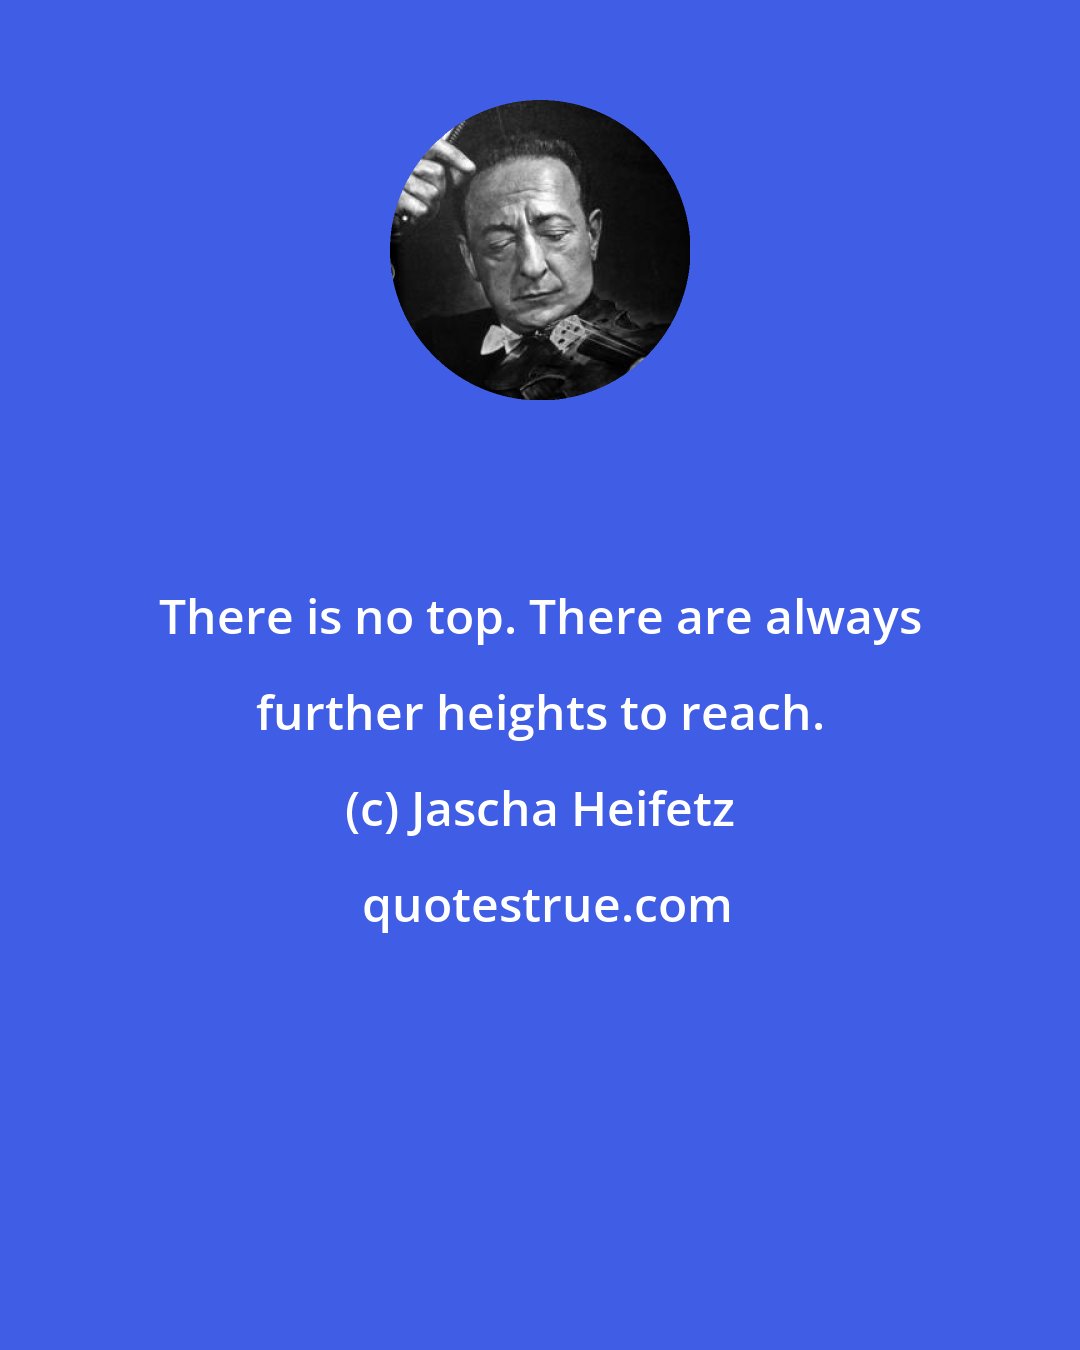 Jascha Heifetz: There is no top. There are always further heights to reach.